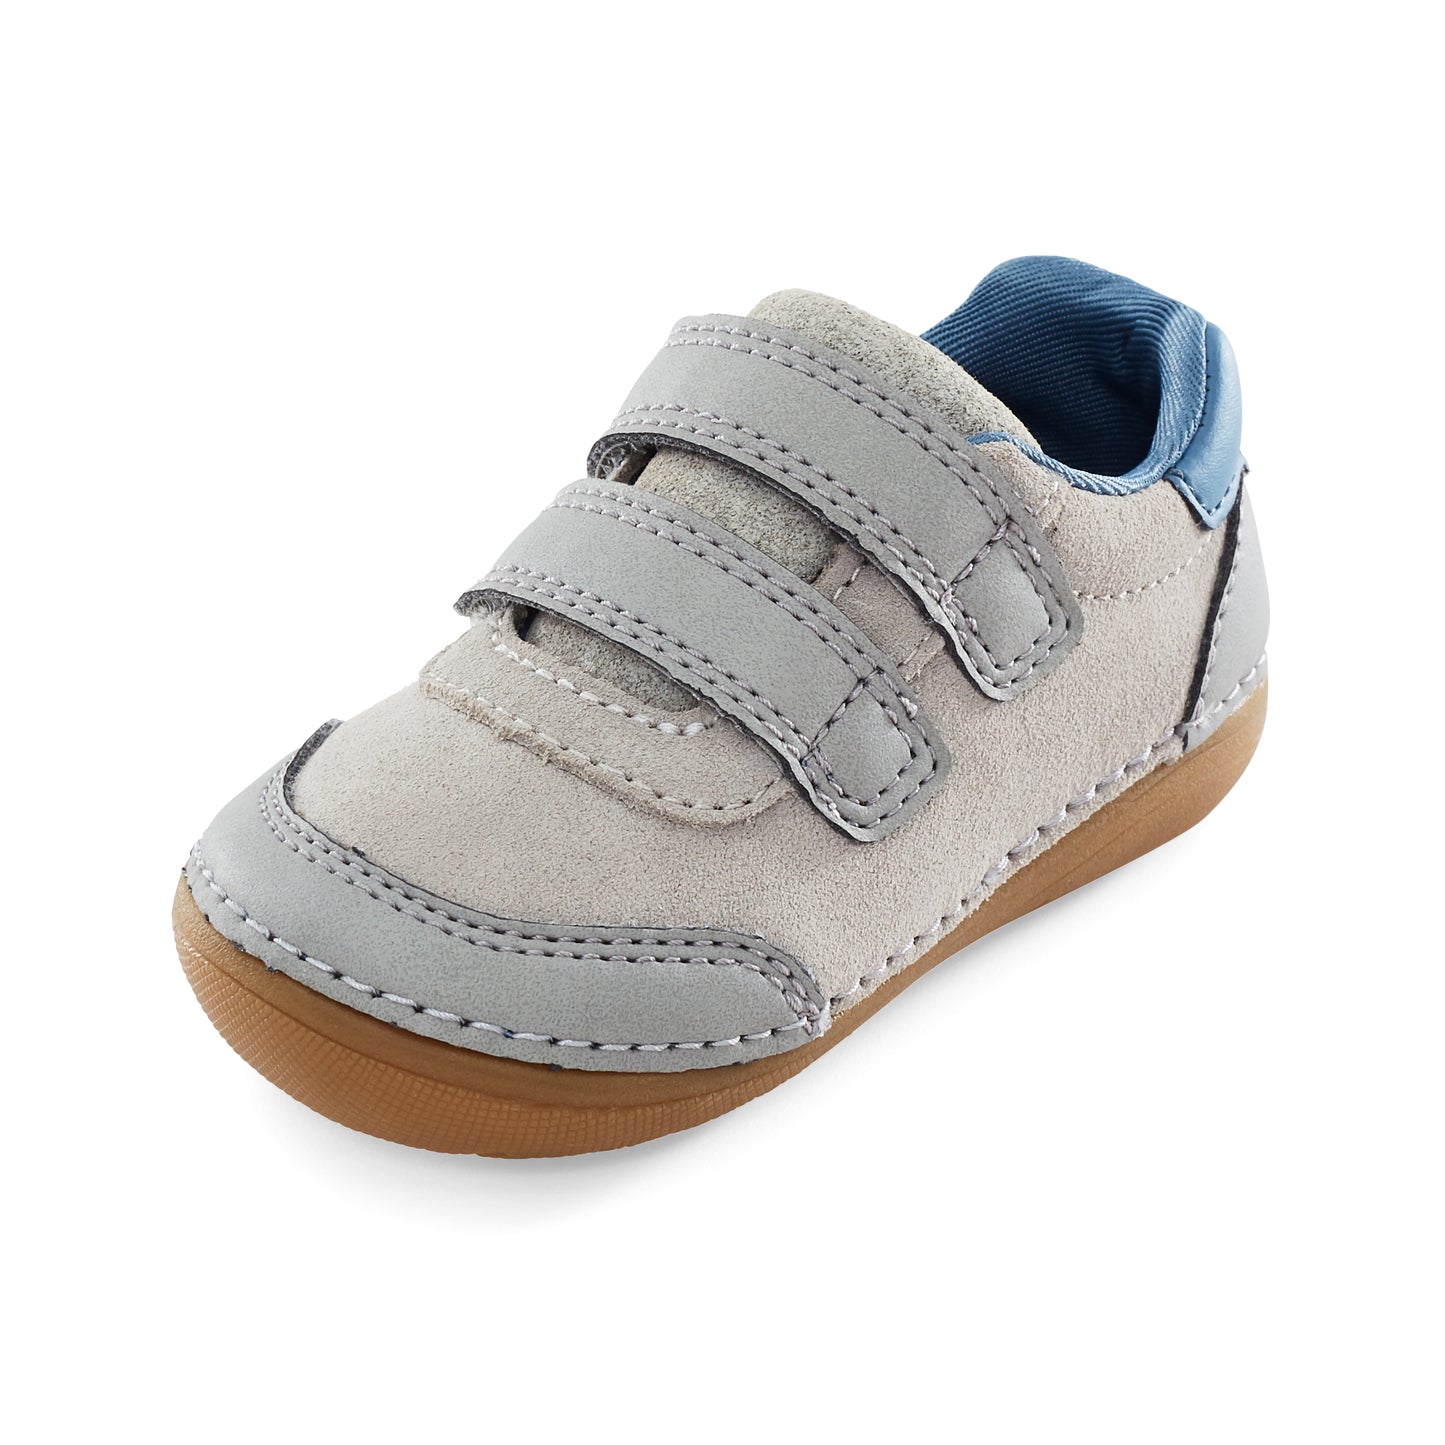 soft-motion-zips-kennedy-sneaker-littlekid-taupe-blue__Taupe/Blue_8